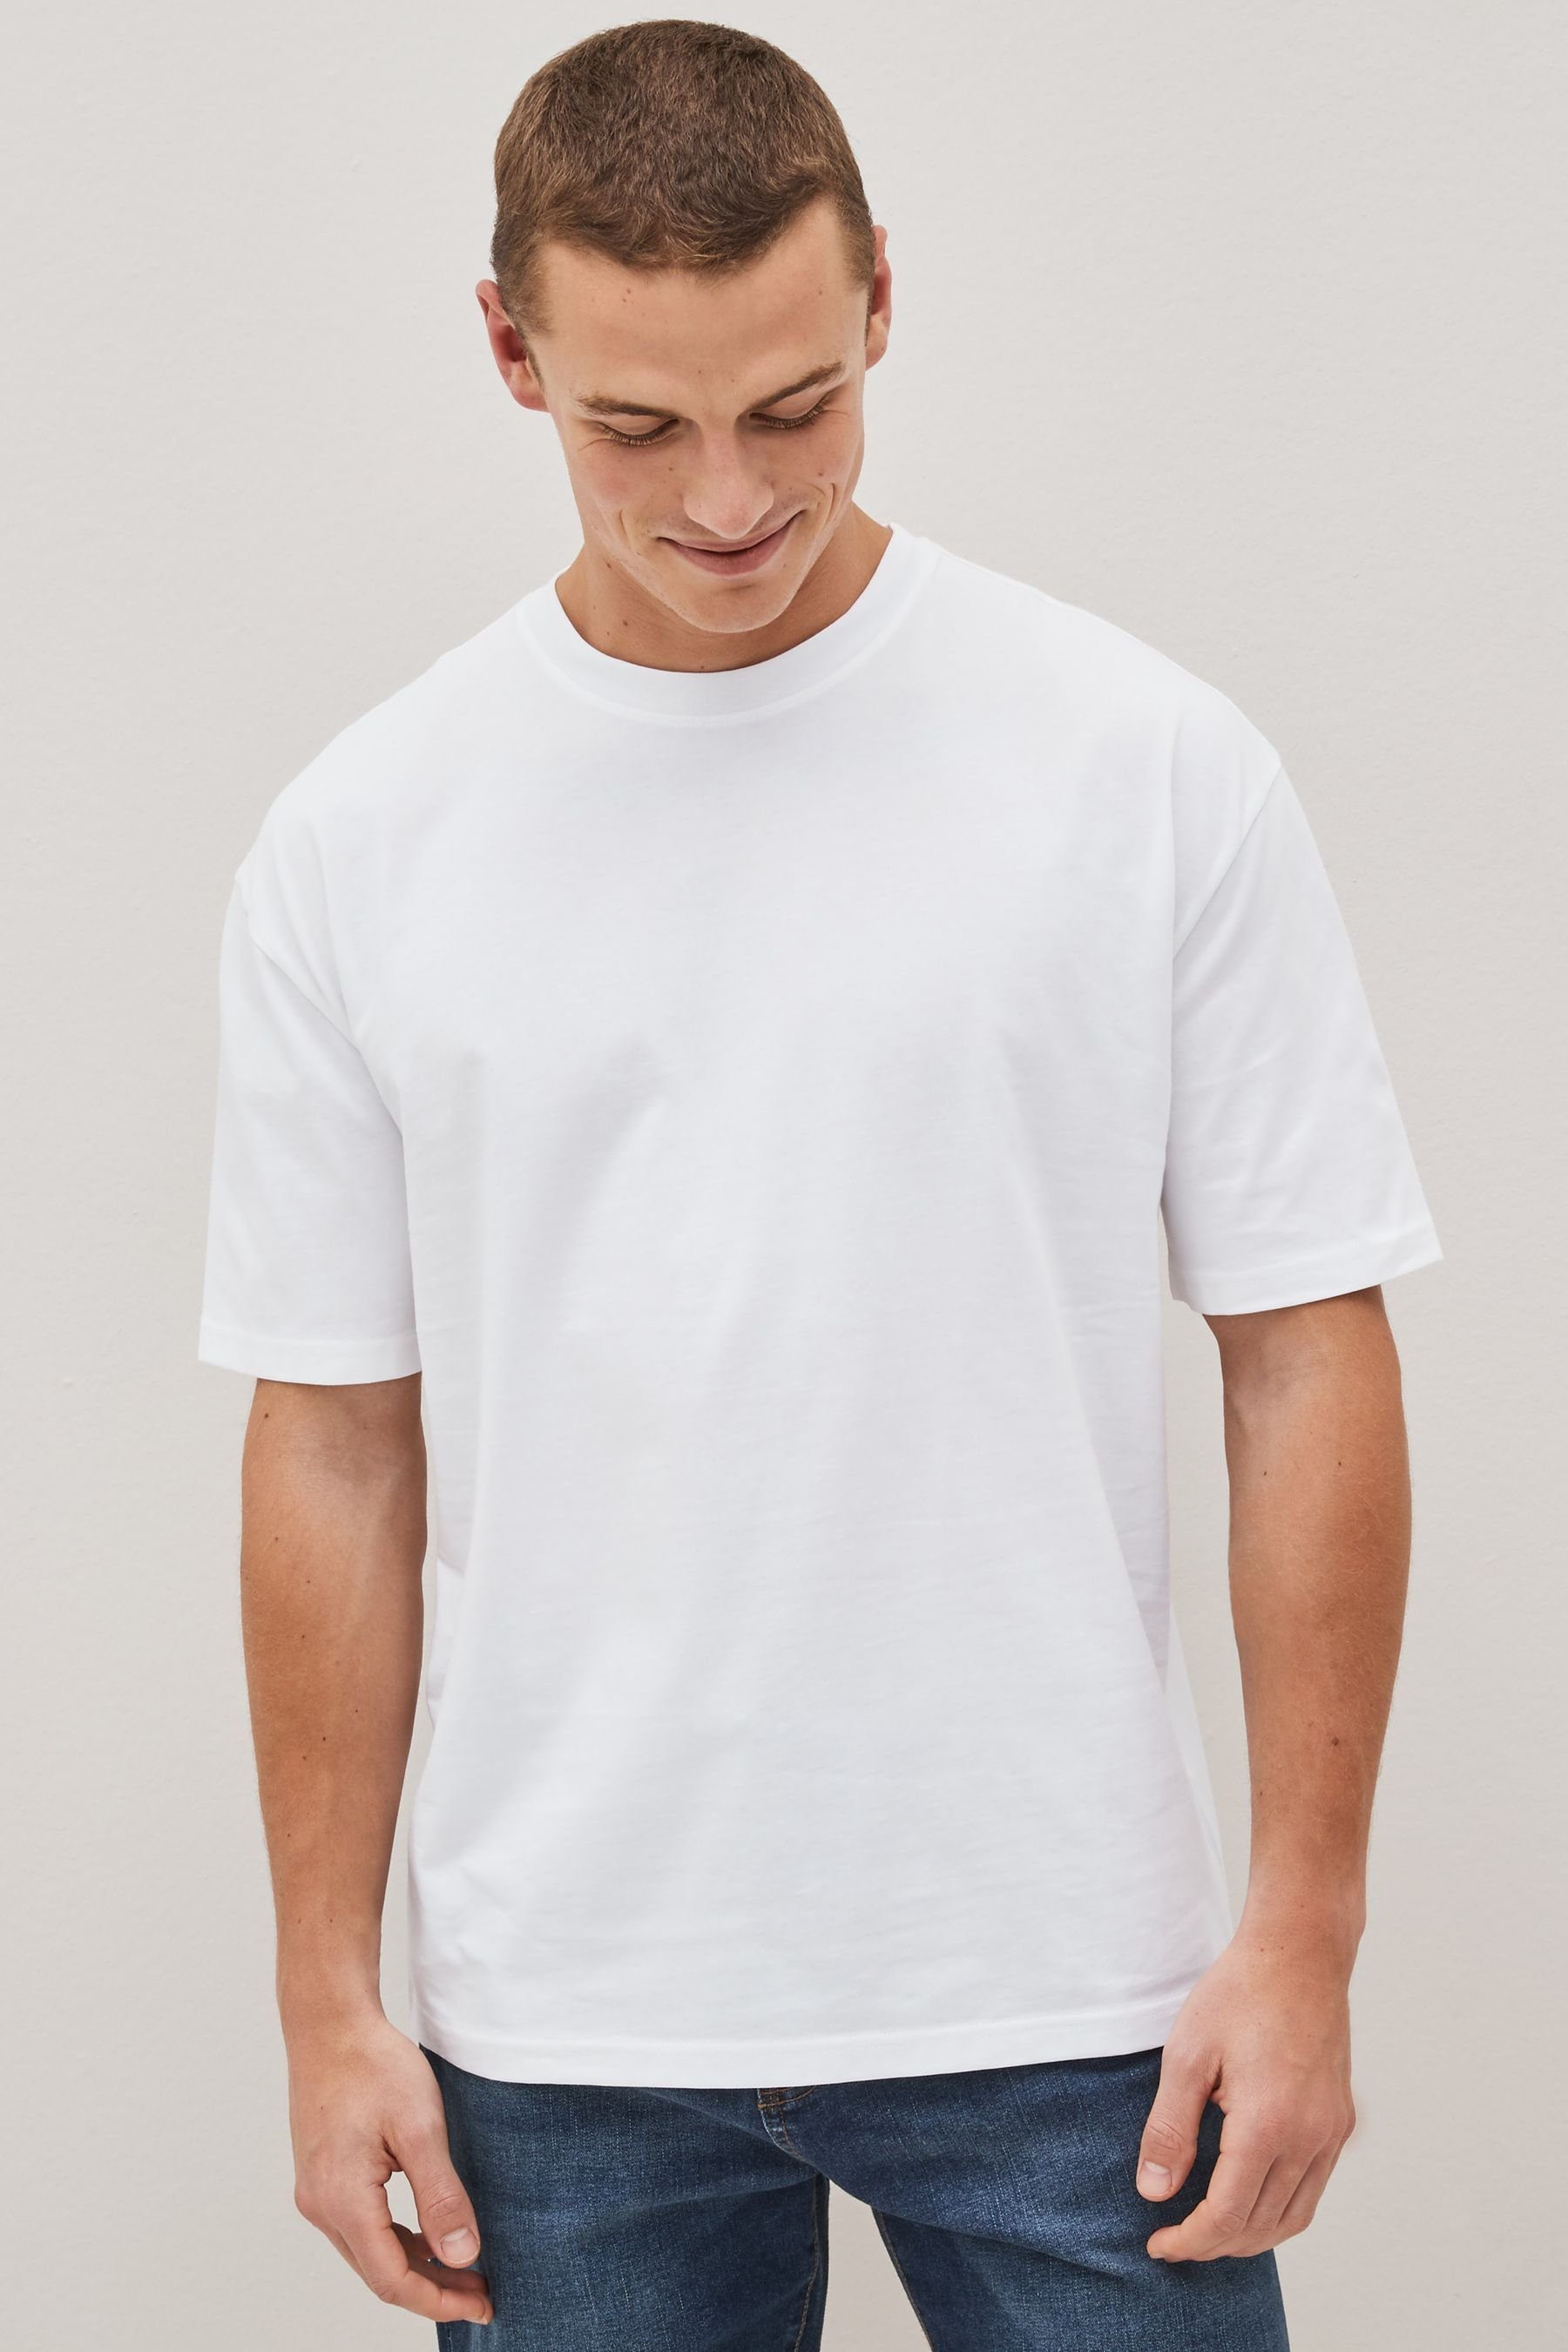 im (1-tlg) White T-Shirt Fit Next Relaxed Rundhals-T-Shirt